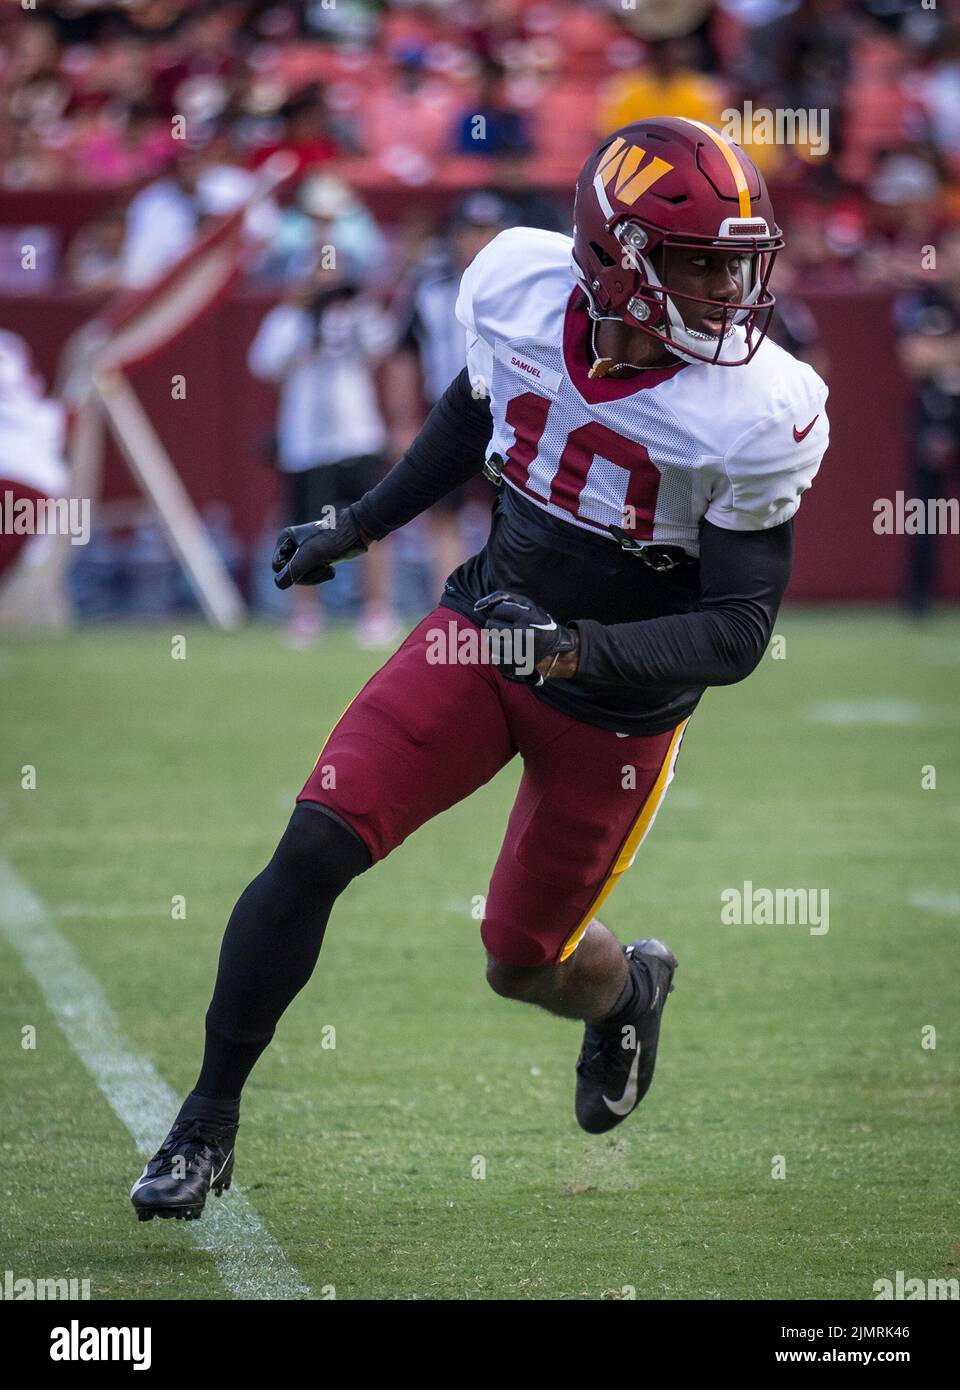 August 6, 2022: Washington Commanders wide receiver Curtis Samuel (10) during the team's NFL football training camp practice at the Fed Ex Field in Landover, Maryland Photographer: Cory Royster Stock Photo